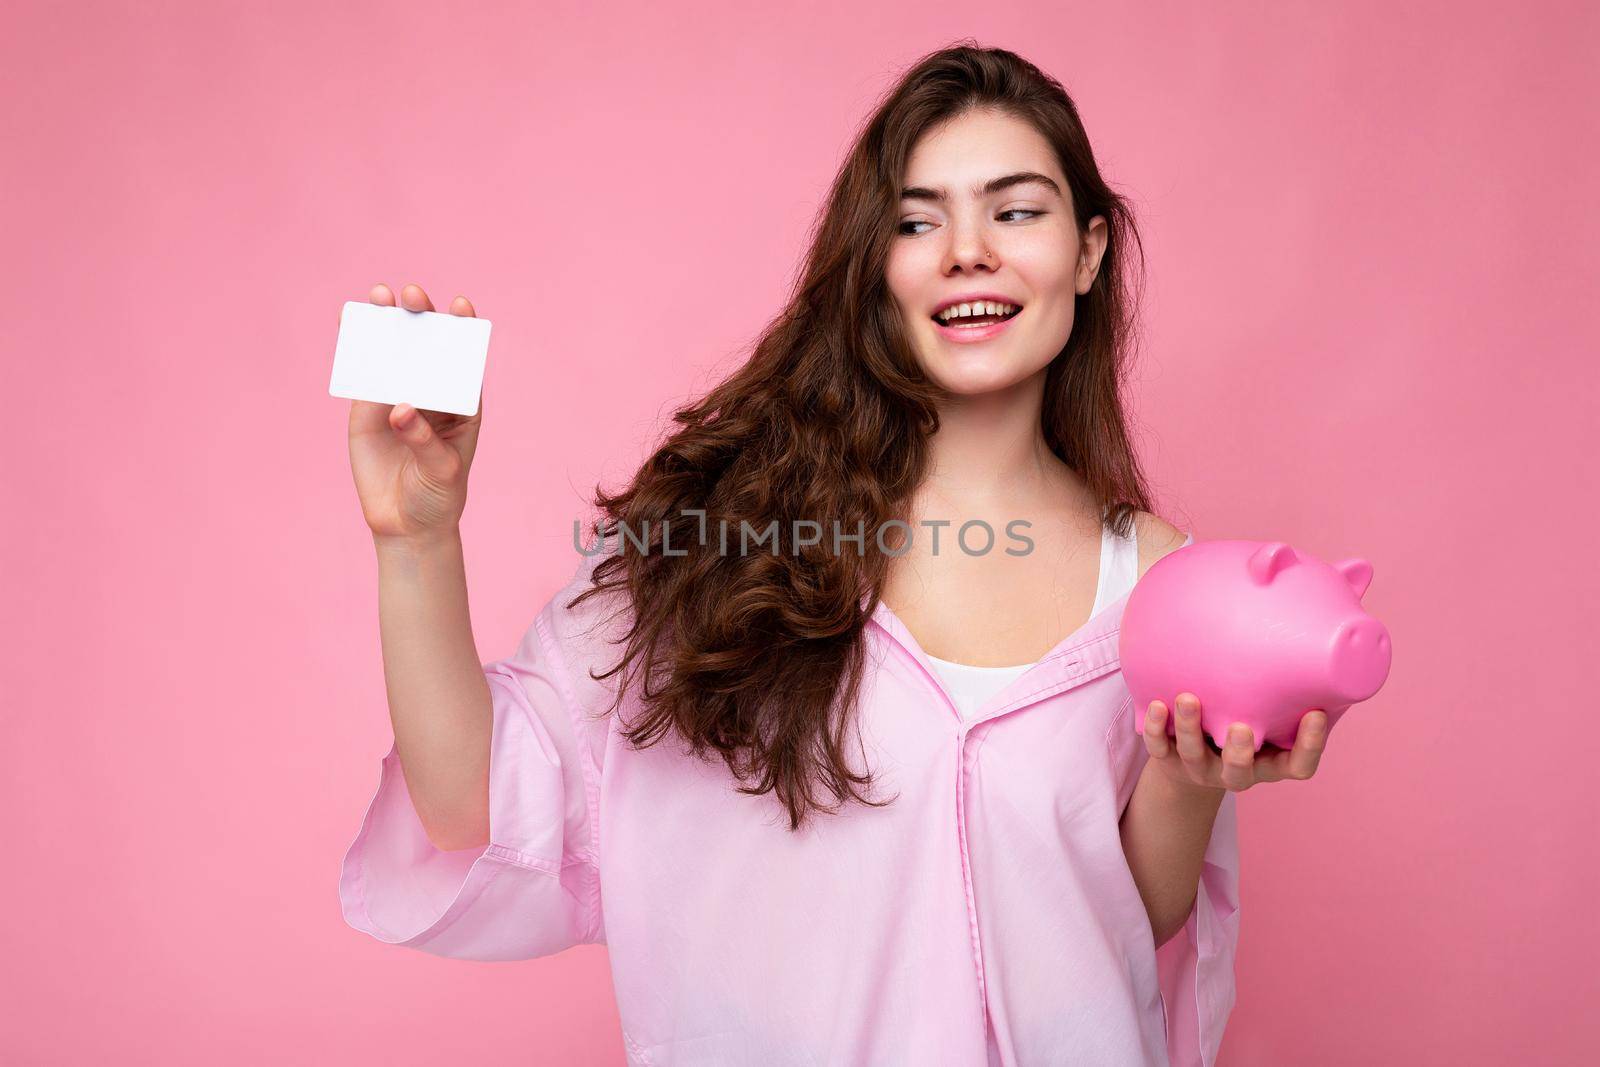 Portrait of beautiful positive cheerful cute smiling young brunette woman in stylish shirt isolated on pink background with copy space and holding pink pig moneybox and credit card for mockup.